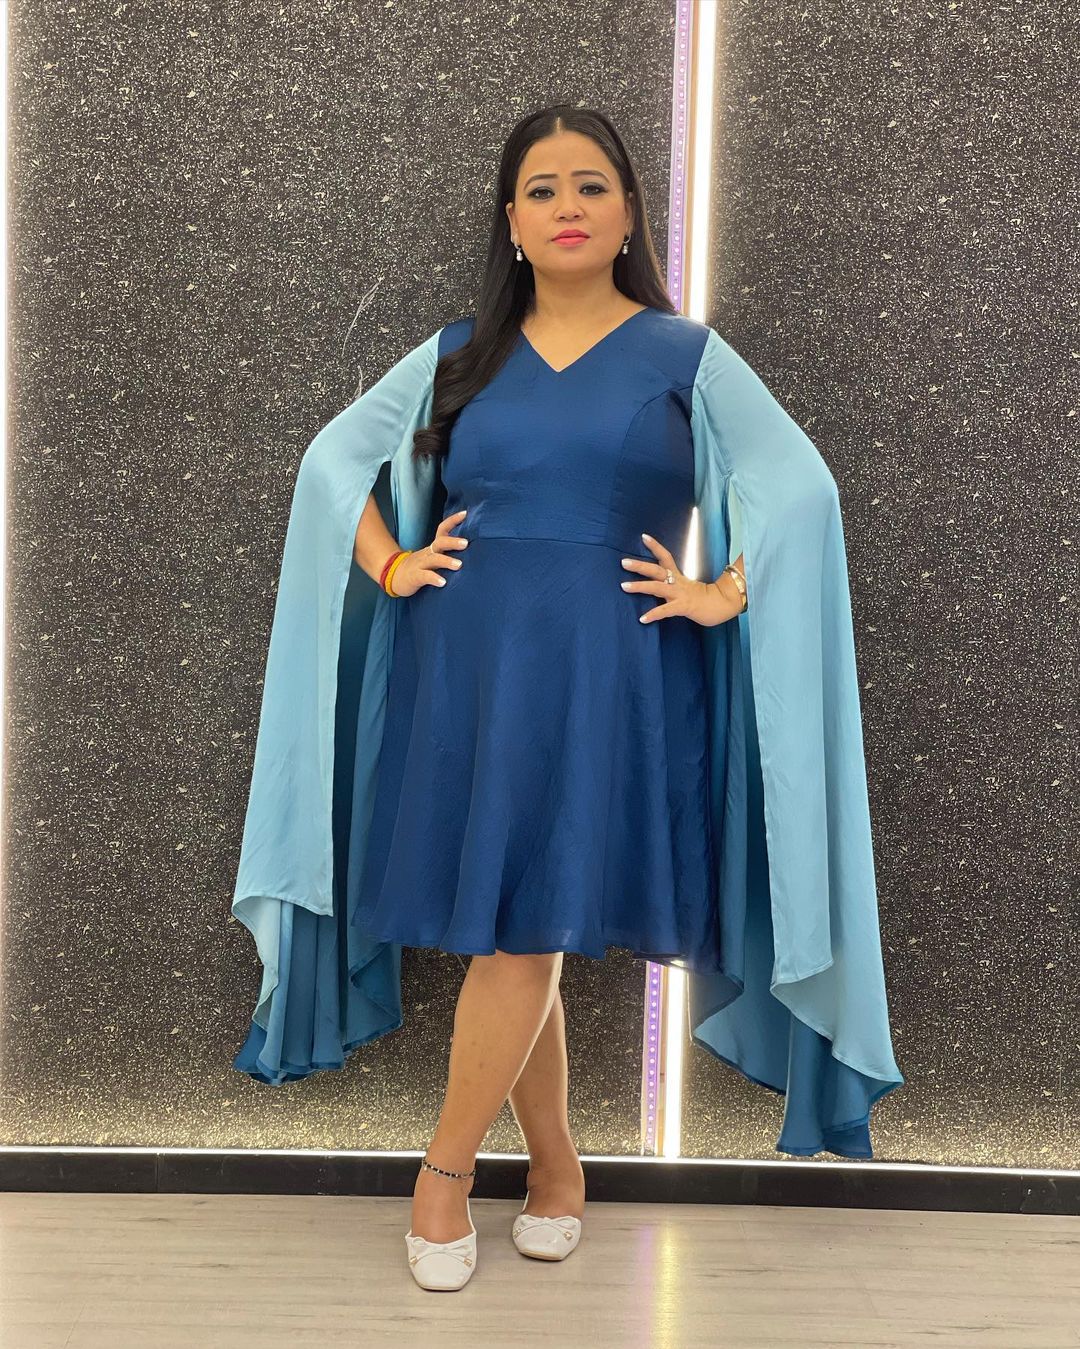 Bharti Singh expressed self-love as she shared this stunning picture on her gram. (Image: Instagram)